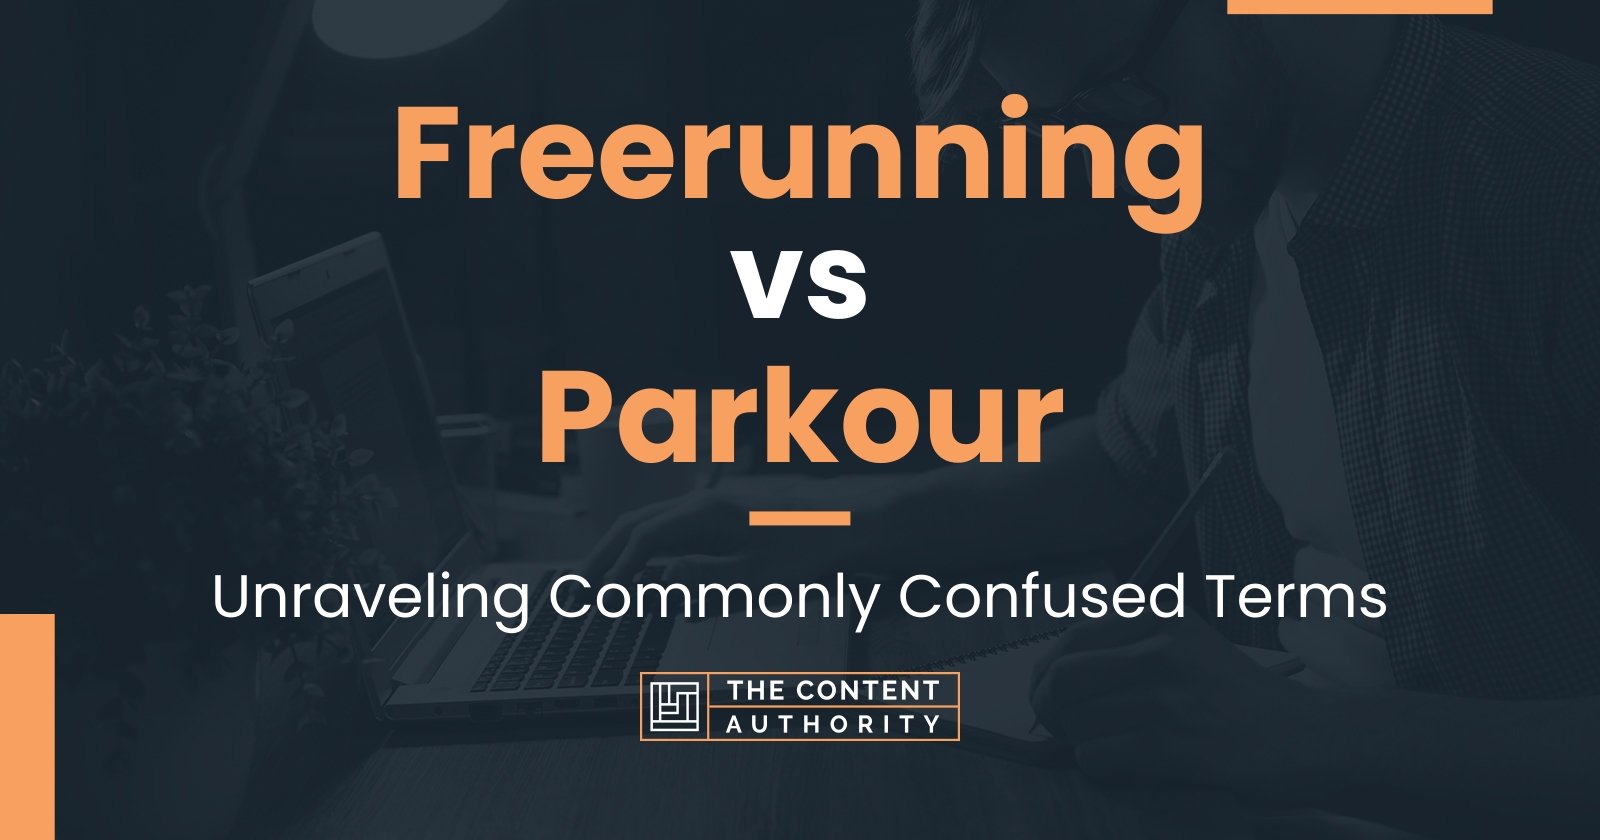 Freerunning vs Parkour: Unraveling Commonly Confused Terms